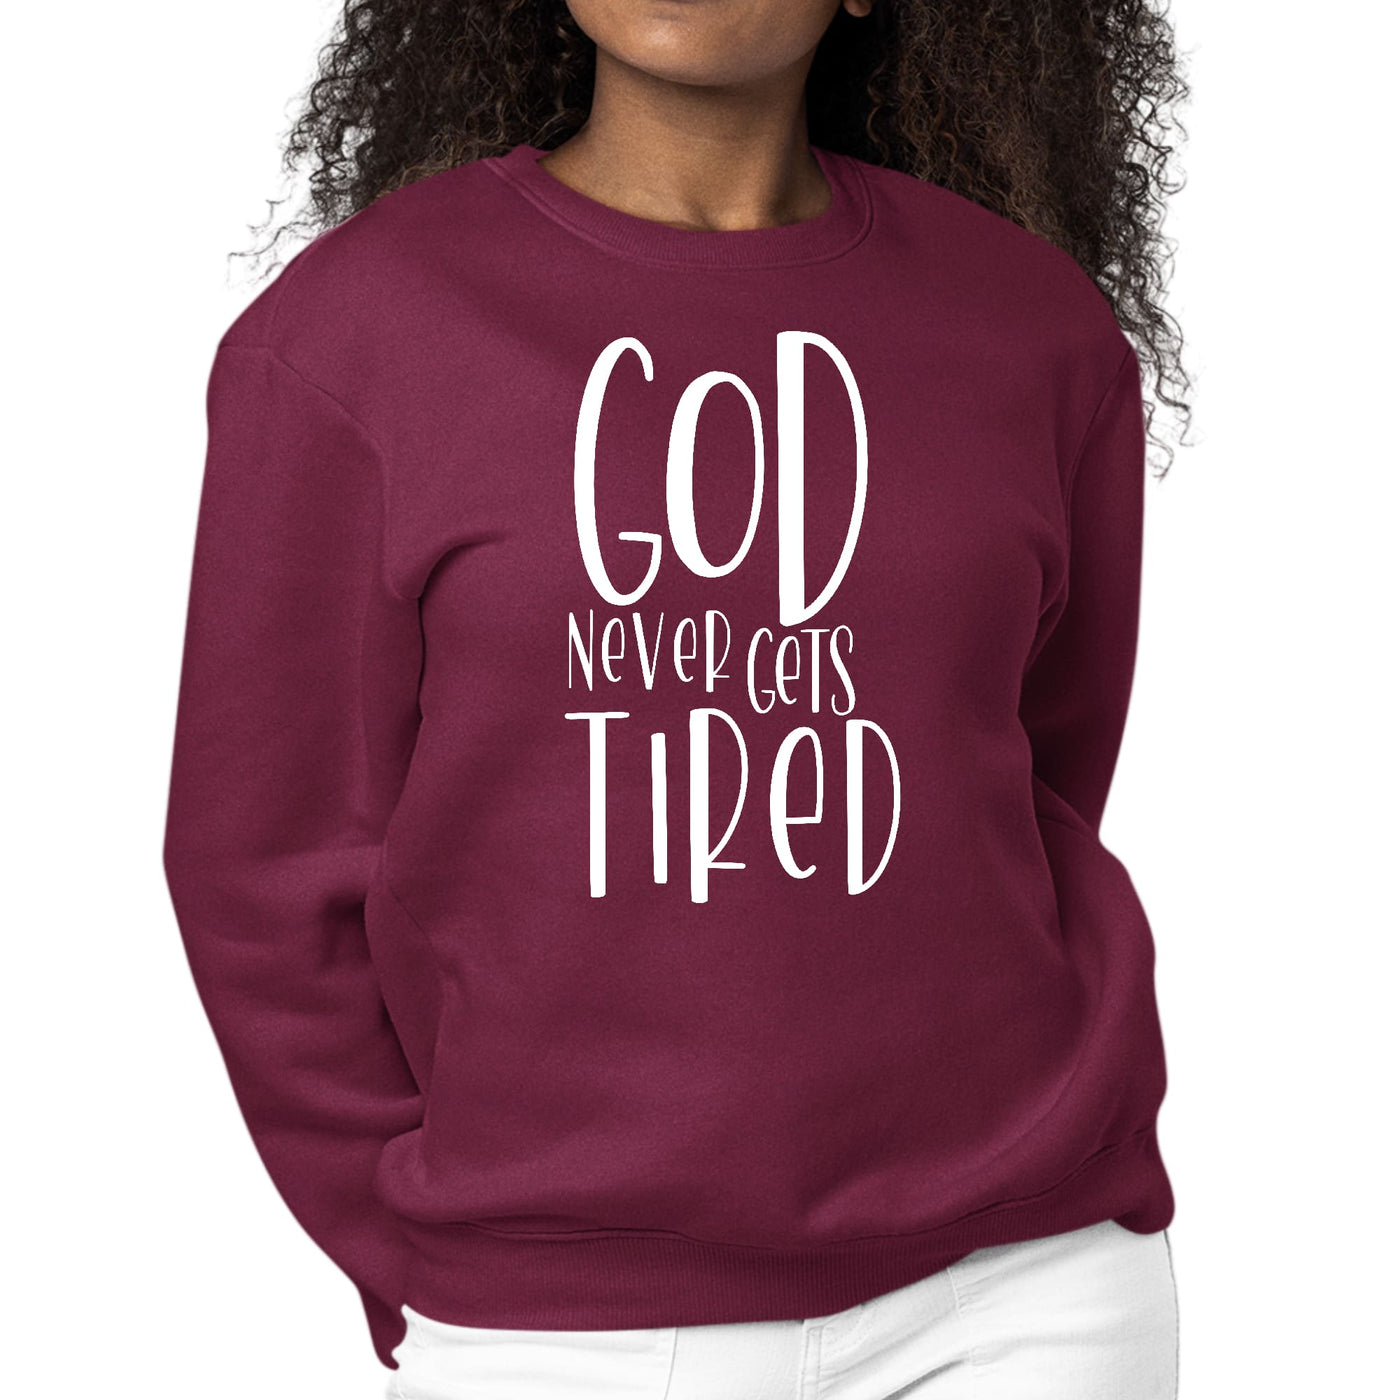 Womens Graphic Sweatshirt Say It Soul - God Never Gets Tired - Womens